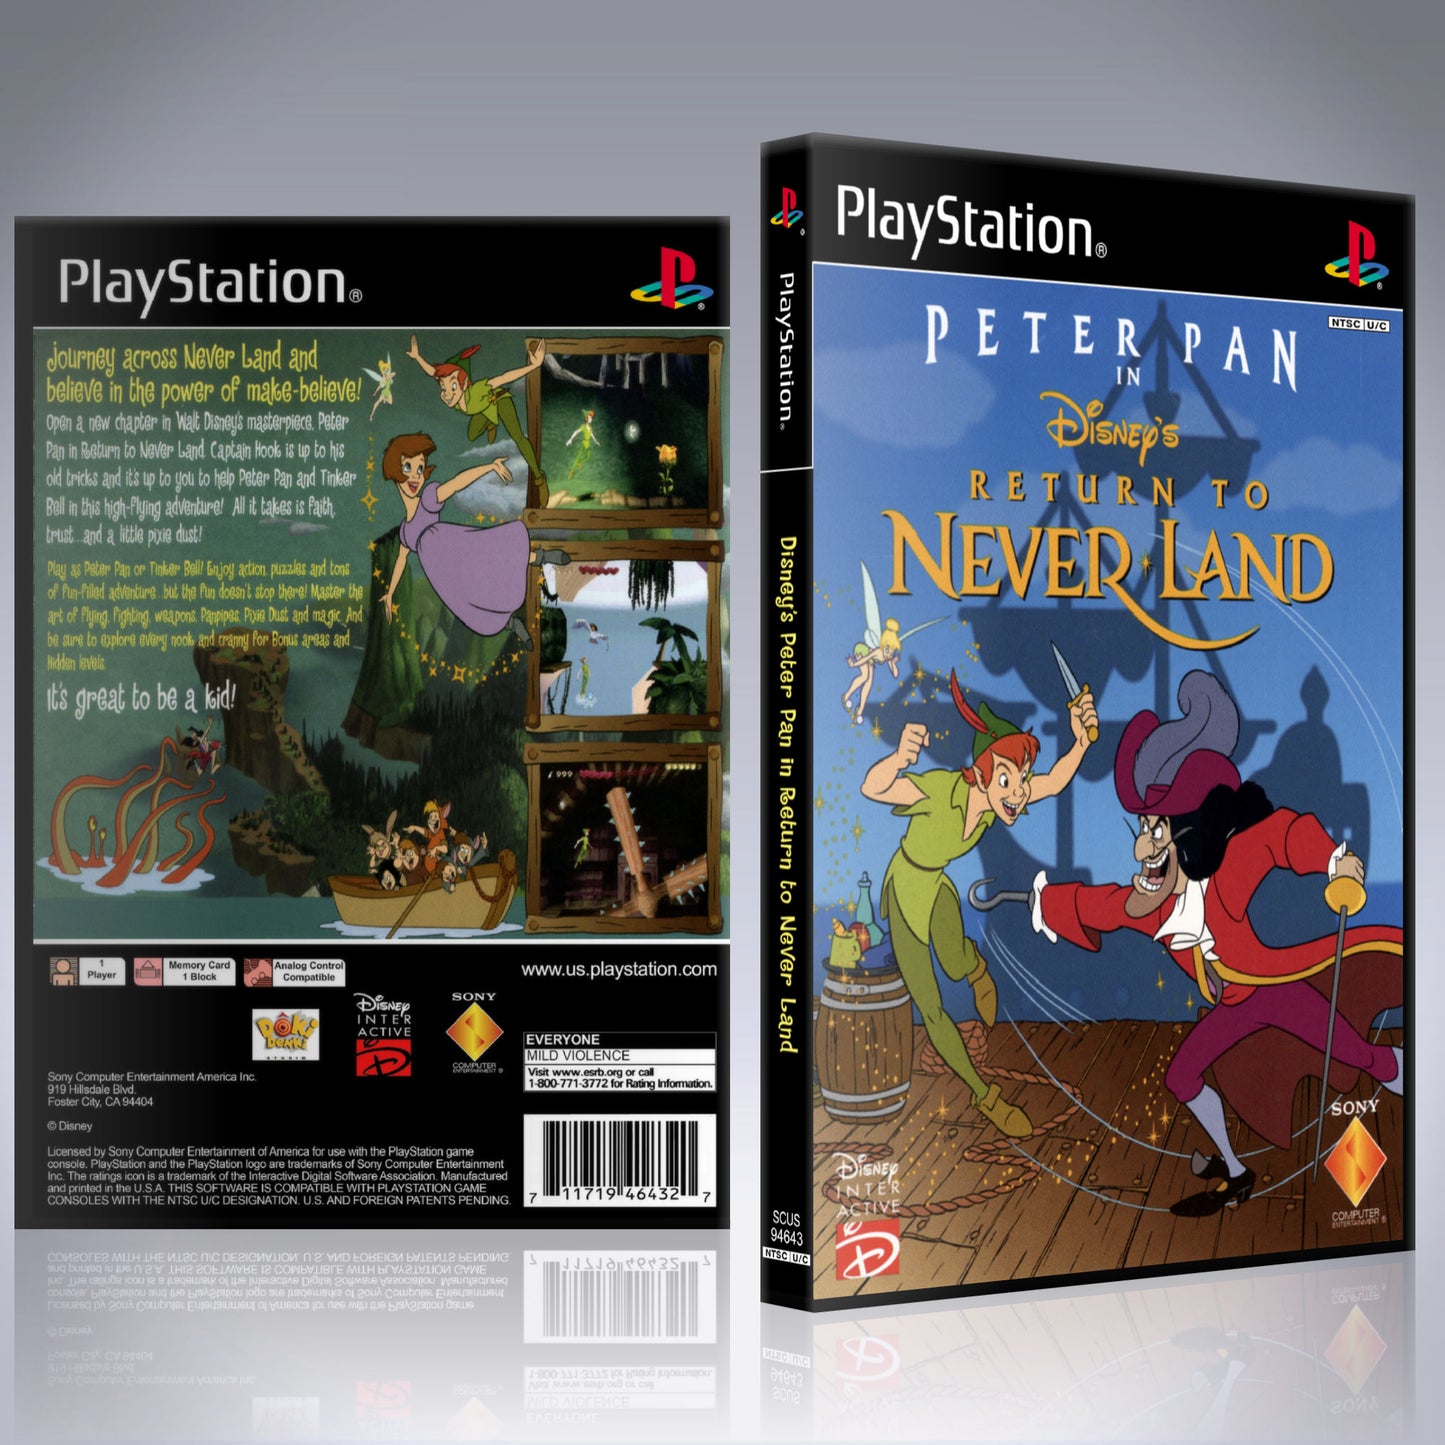 PS1 Case - NO GAME - Peter Pan Return to Neverland